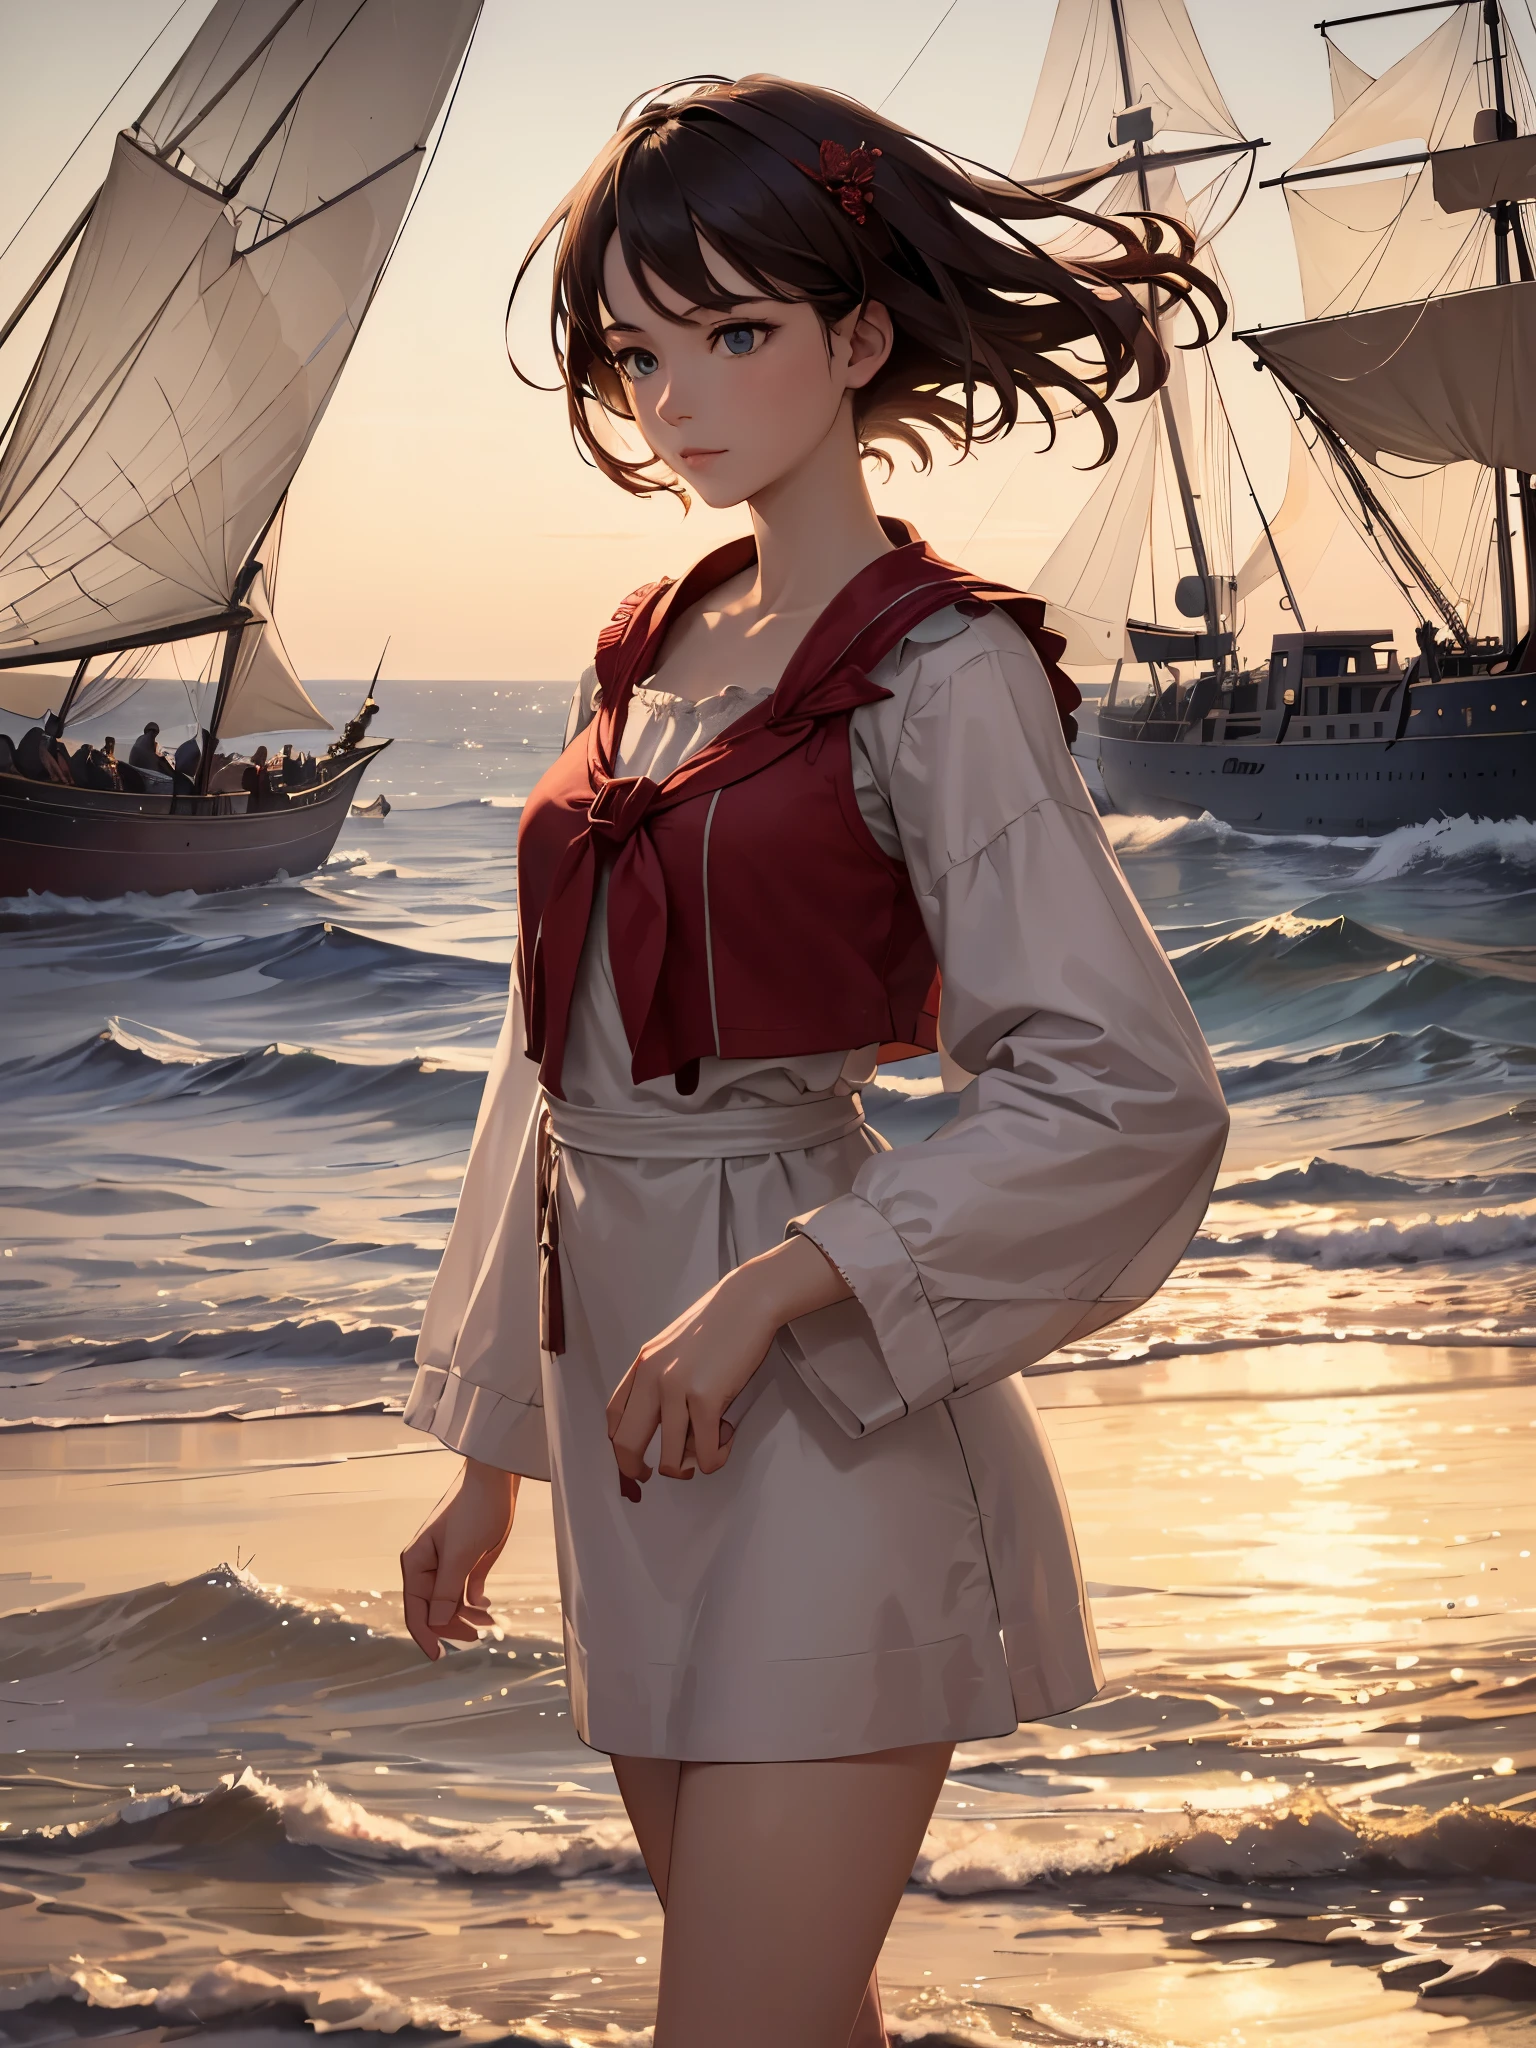 (masterpiece, super high quality, super detailed), landscape, young girl, Assol, scarlet sails, girl looking at the sea from the coast, camera looking at the sea, intricate details, sailing ship with scarlet sails, A scene from a novel by Alexander Greene "scarlet sails"